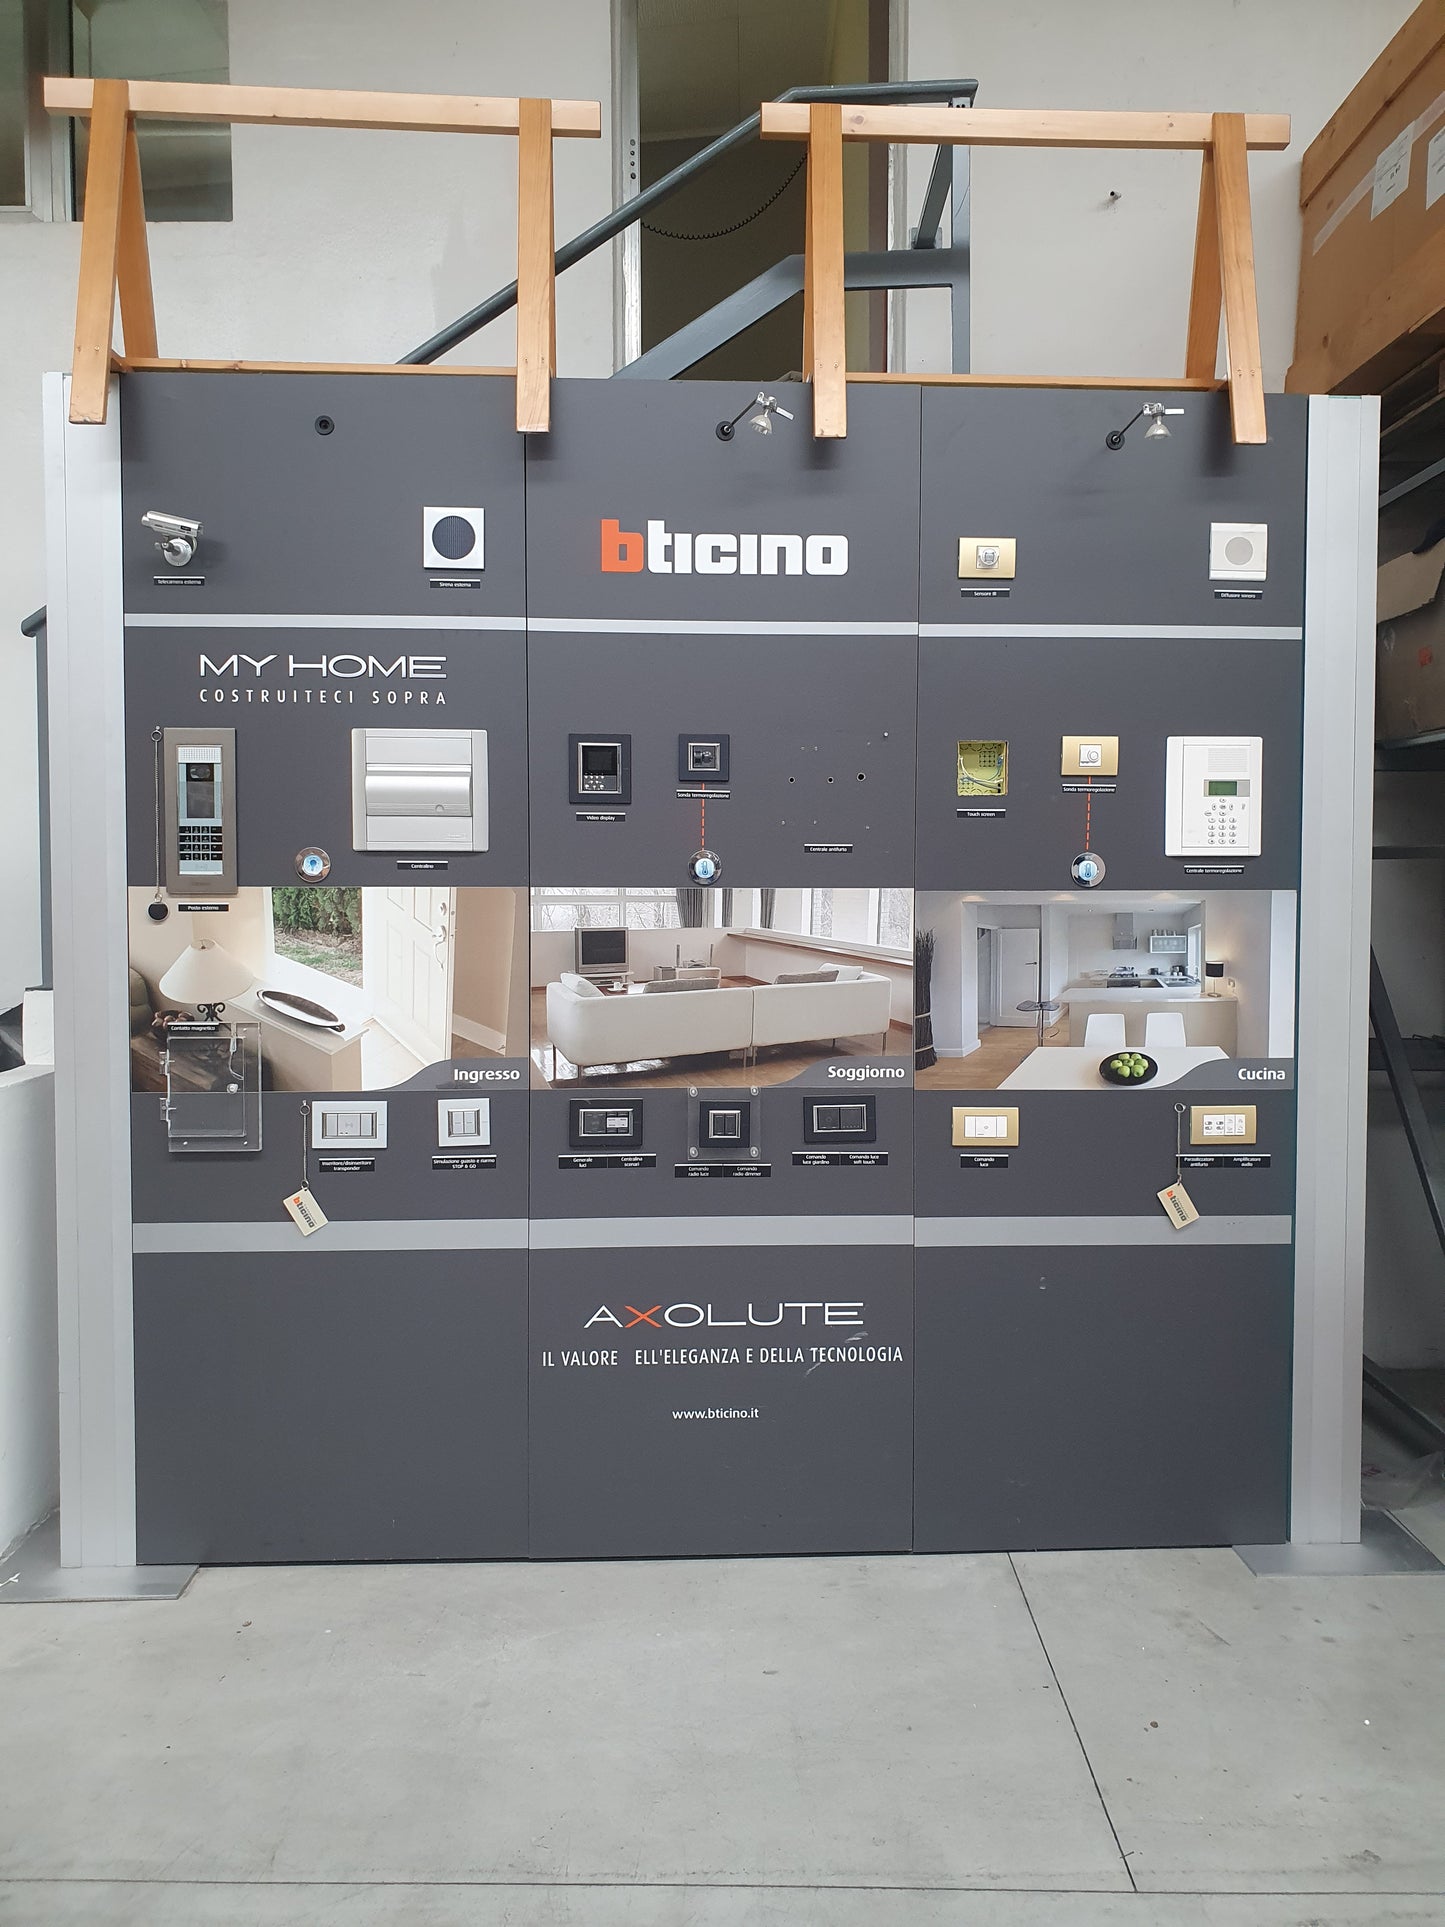 BTicino Myhome Axolute video display